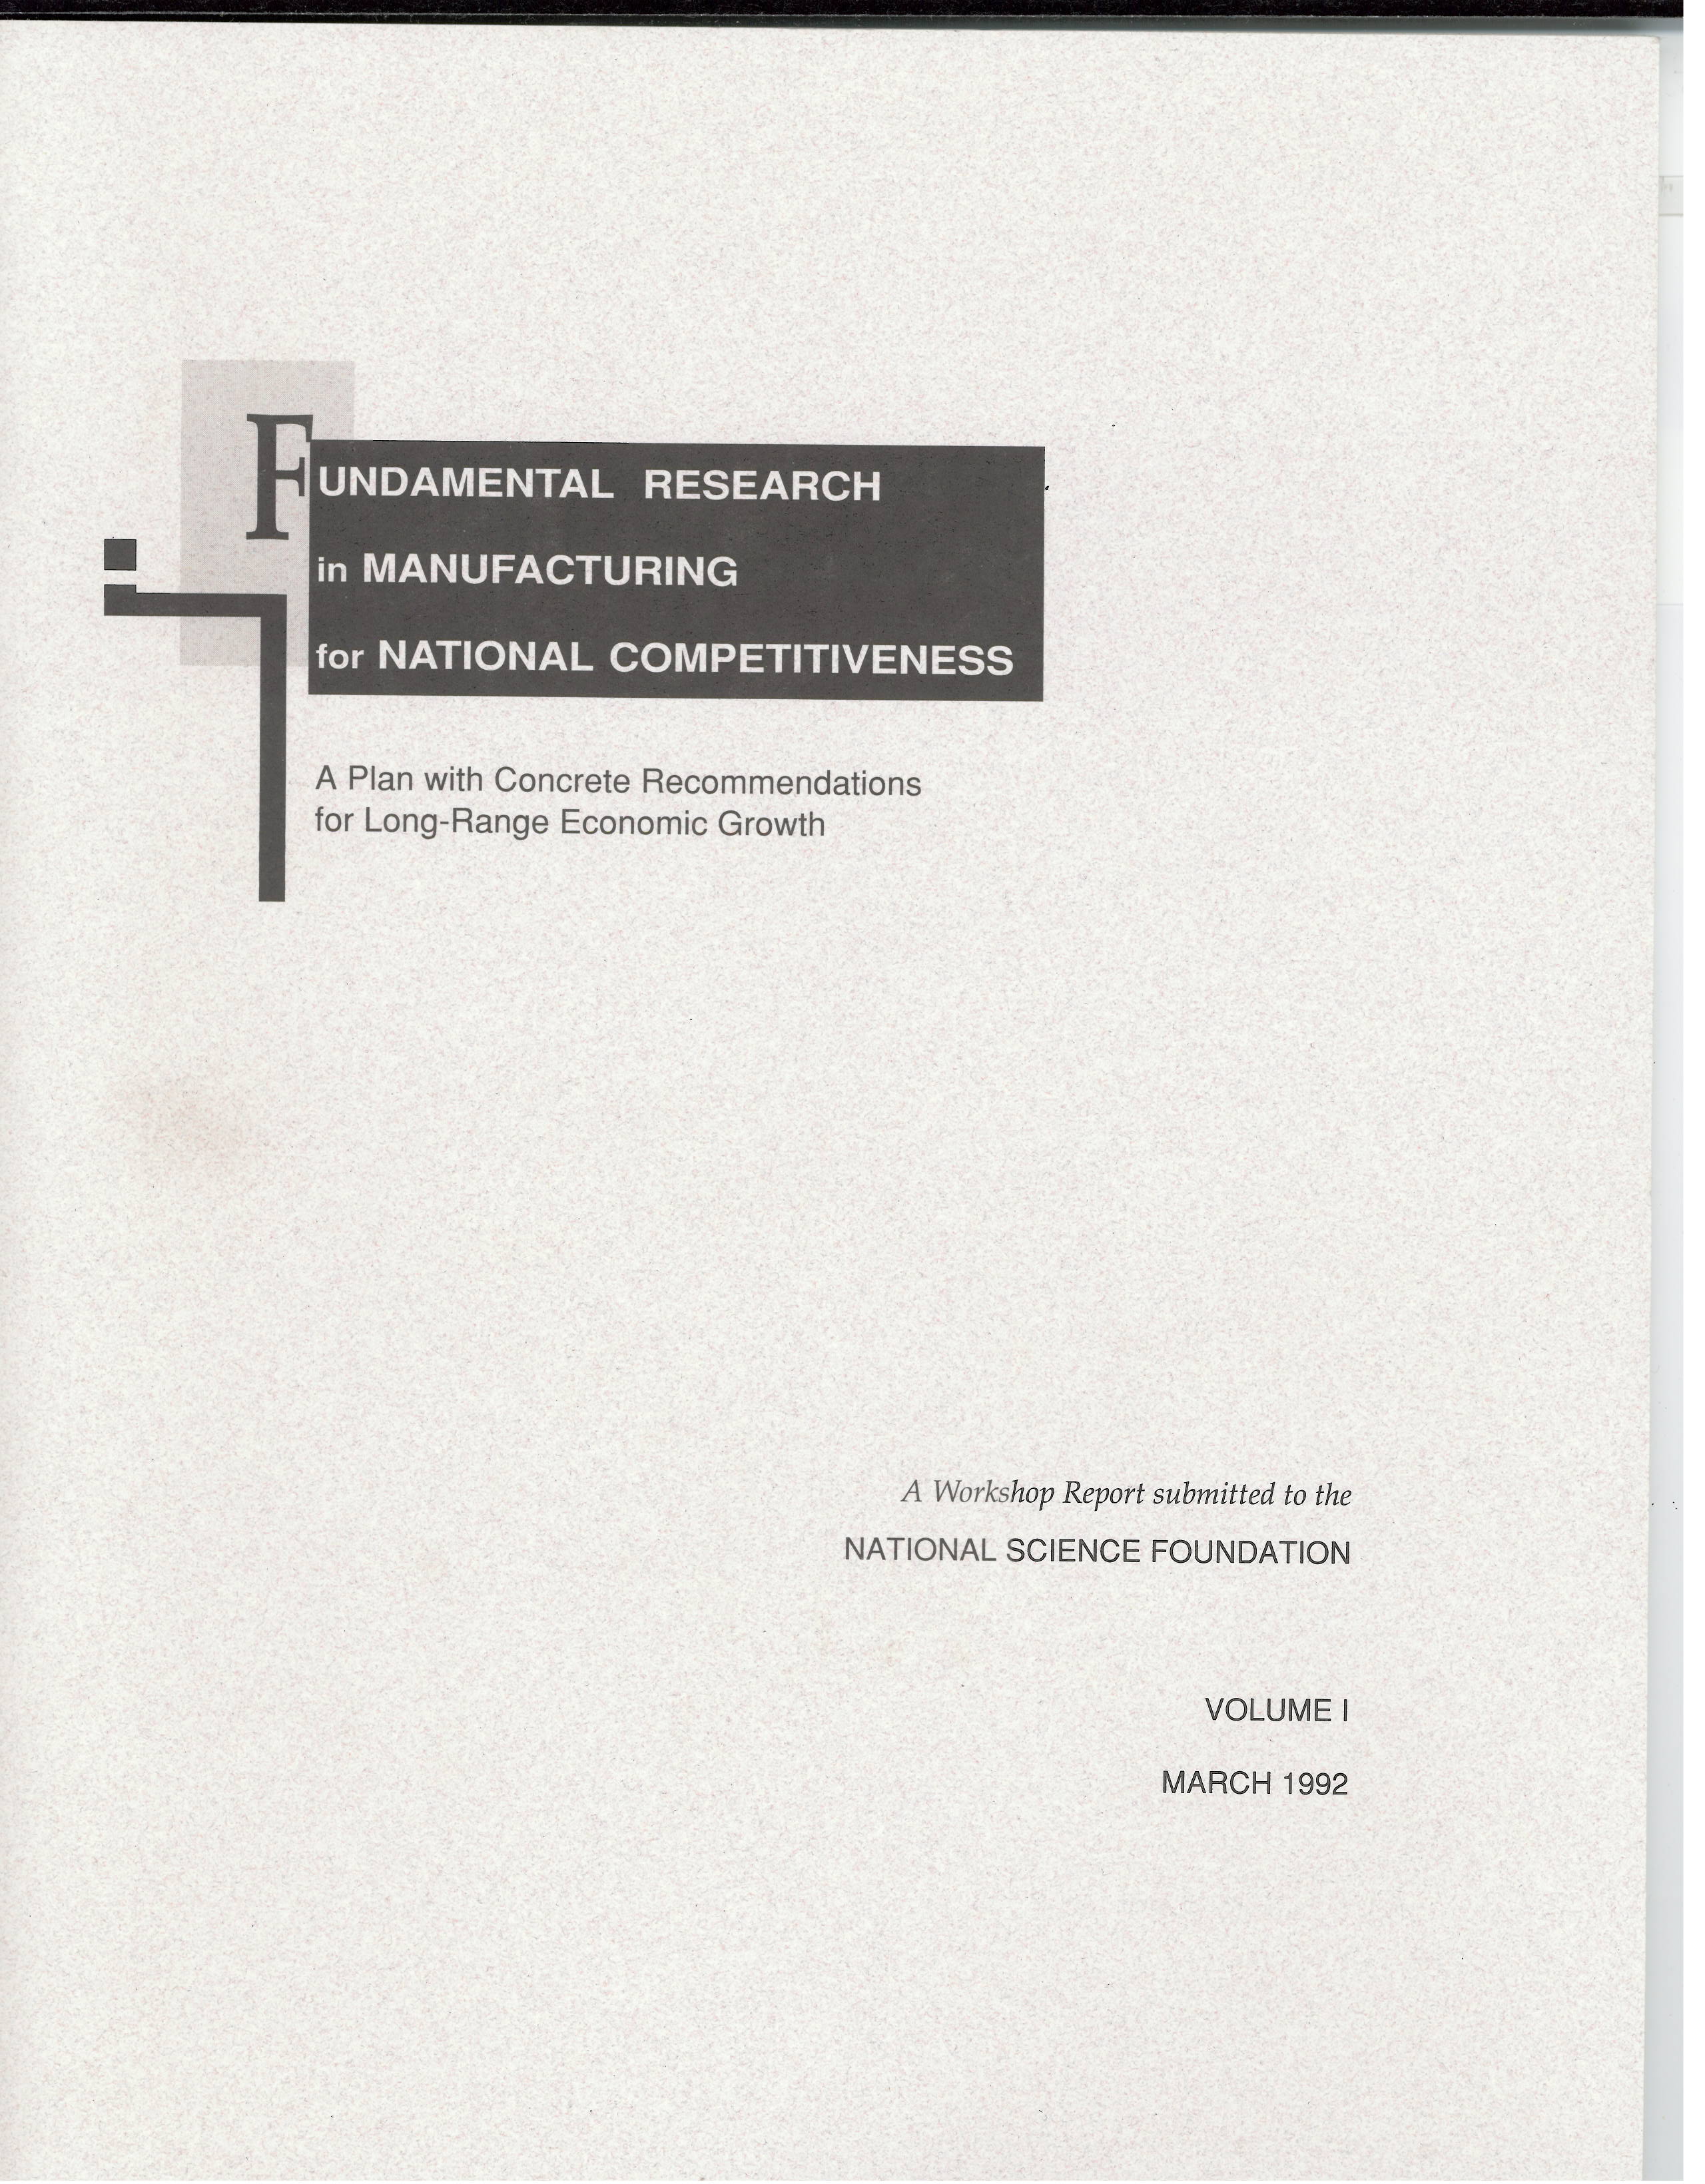 fundemental_research_in_manufacturing_for_national_competitiveness.jpg